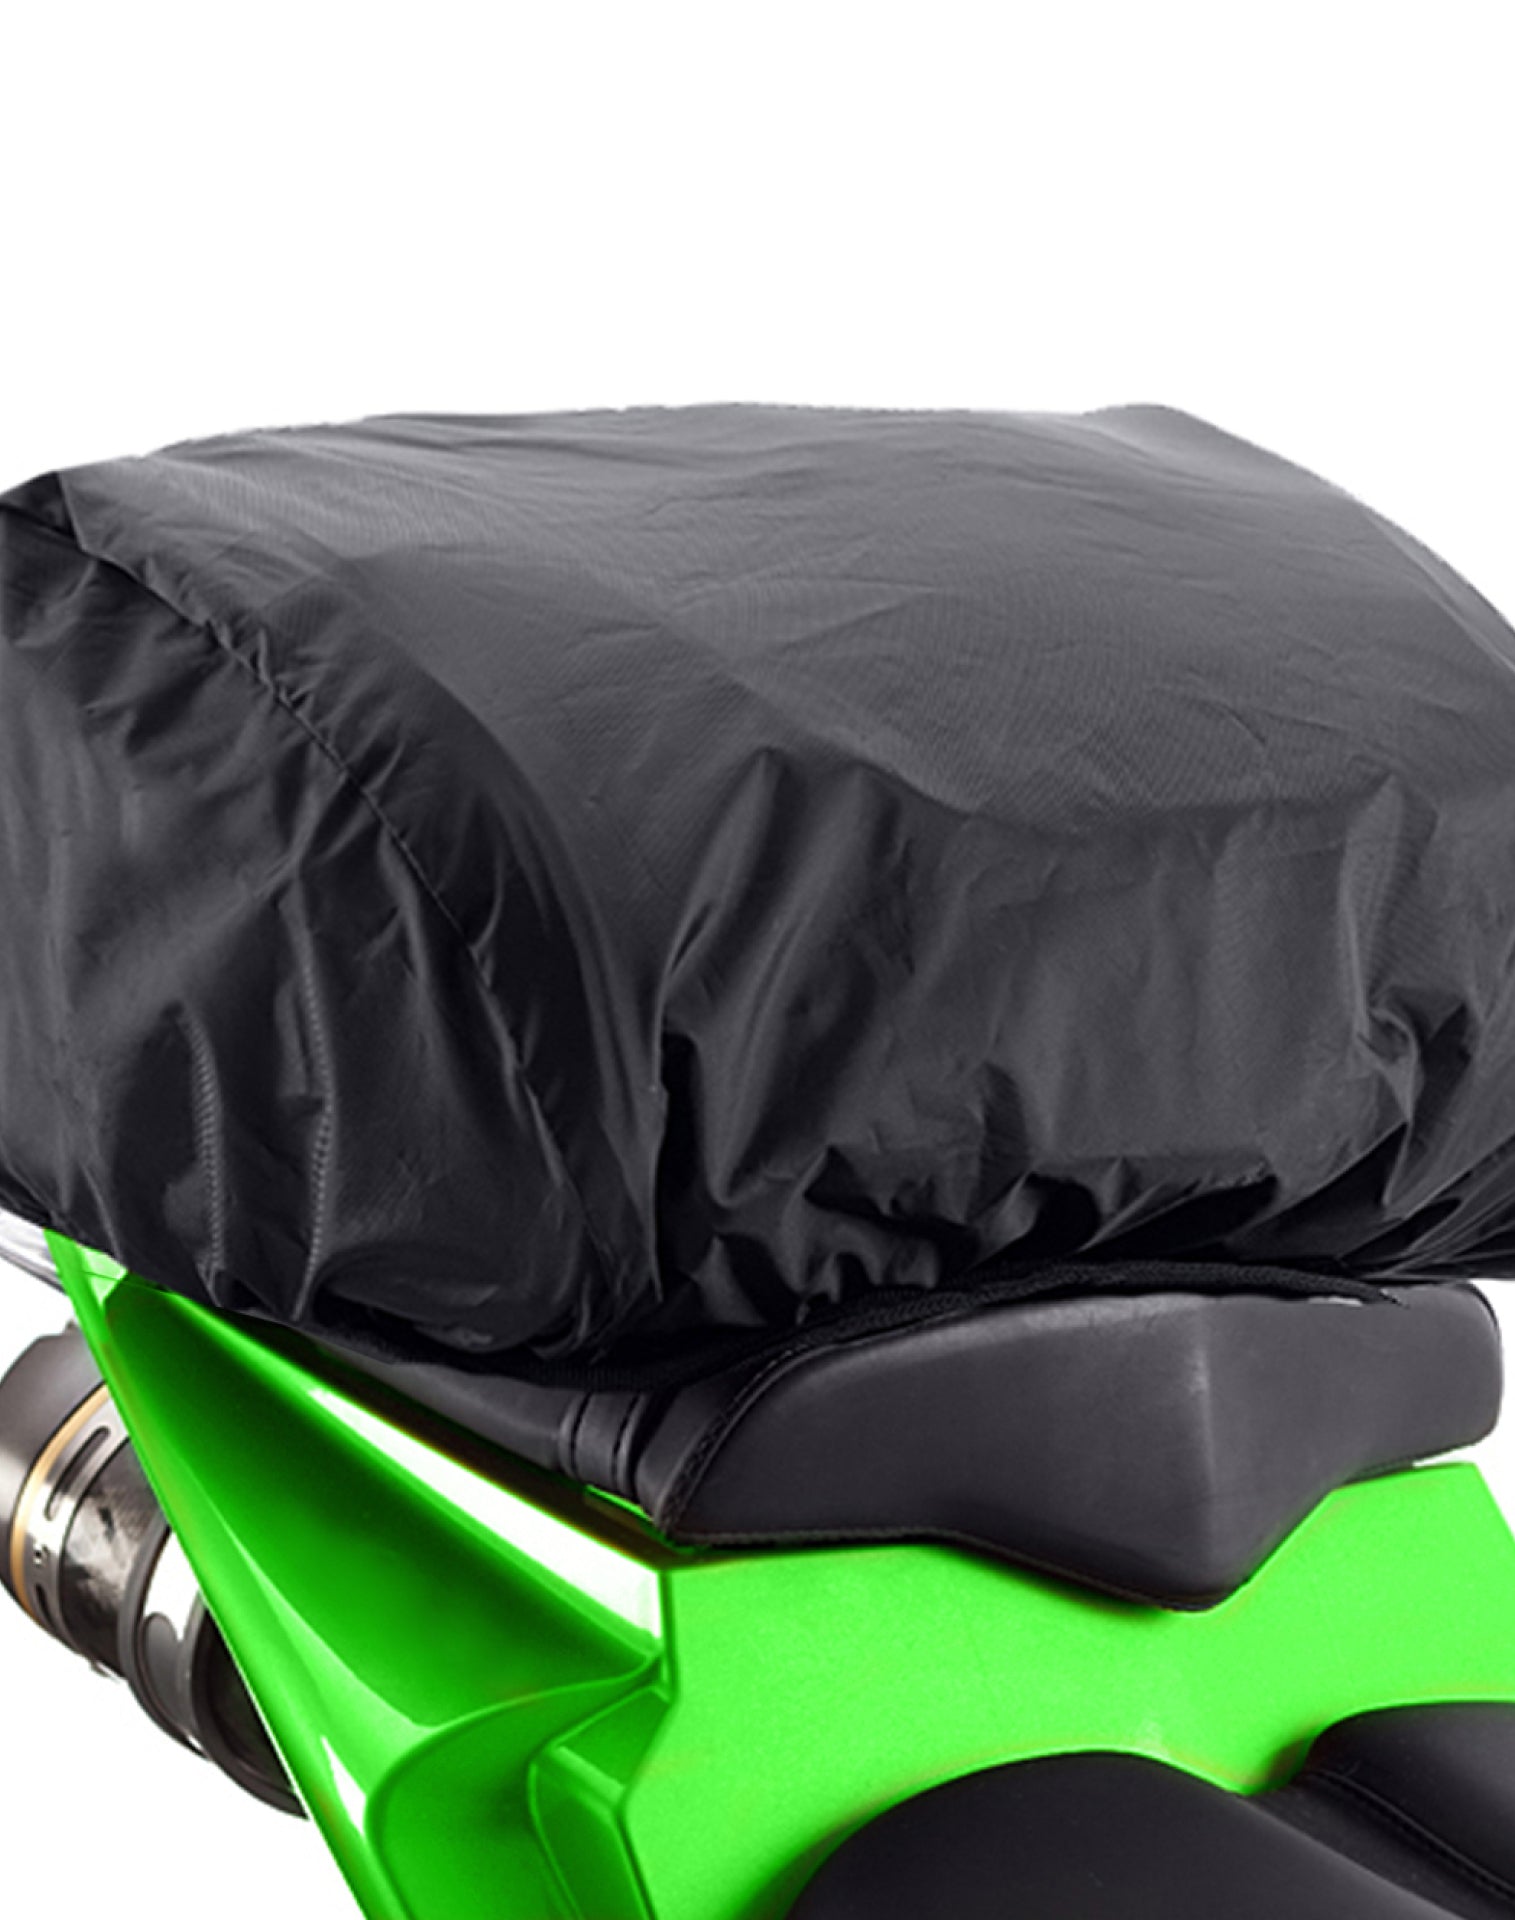 Viking AXE Small Triumph Motorcycle Tail Bag Durable